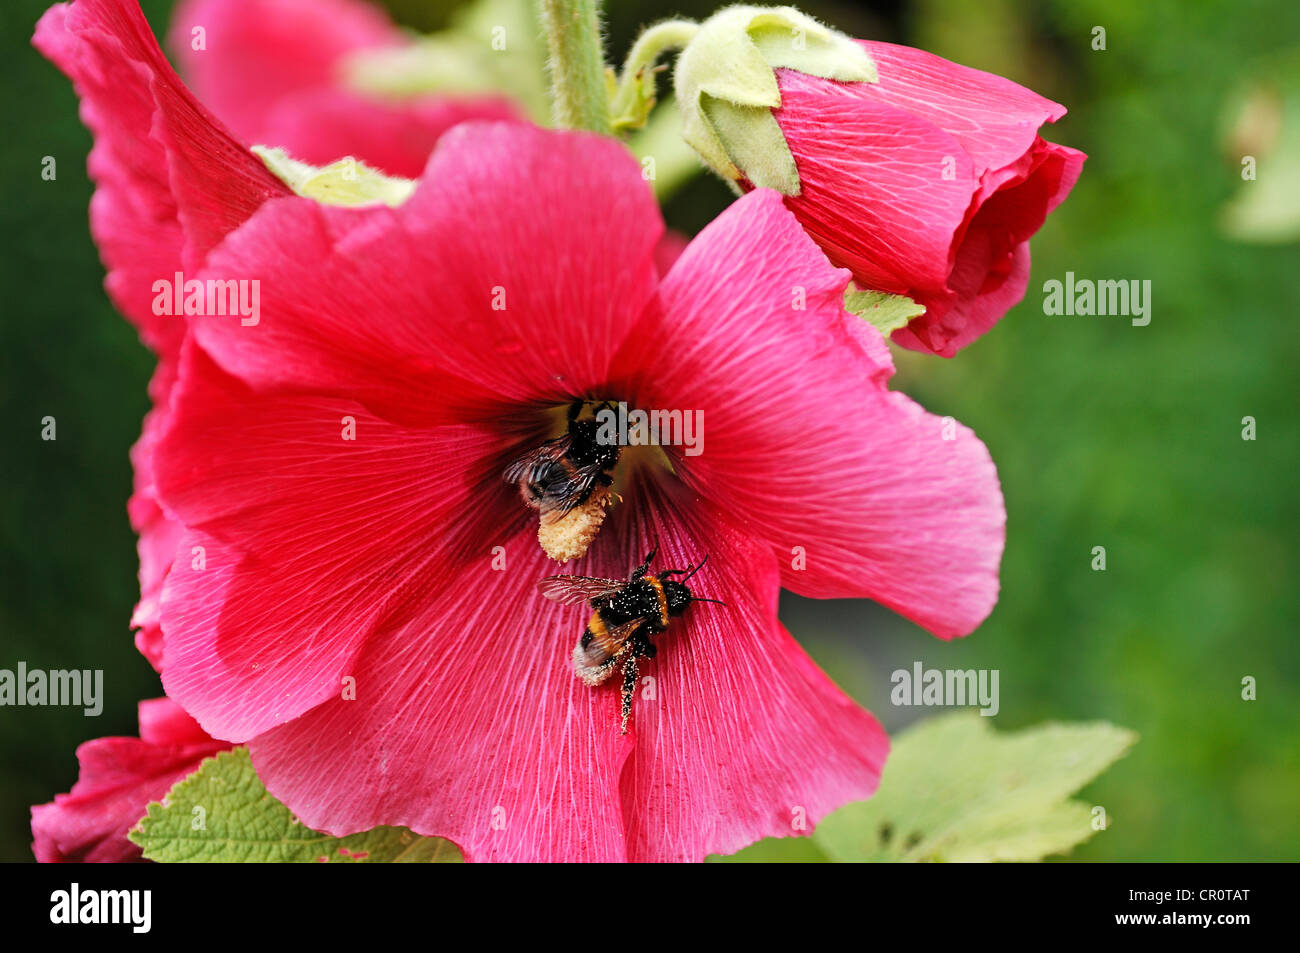 Two Bumblebees (Bombus) covered in pollen on a Hollyhook (Alcea rosea) Stock Photo